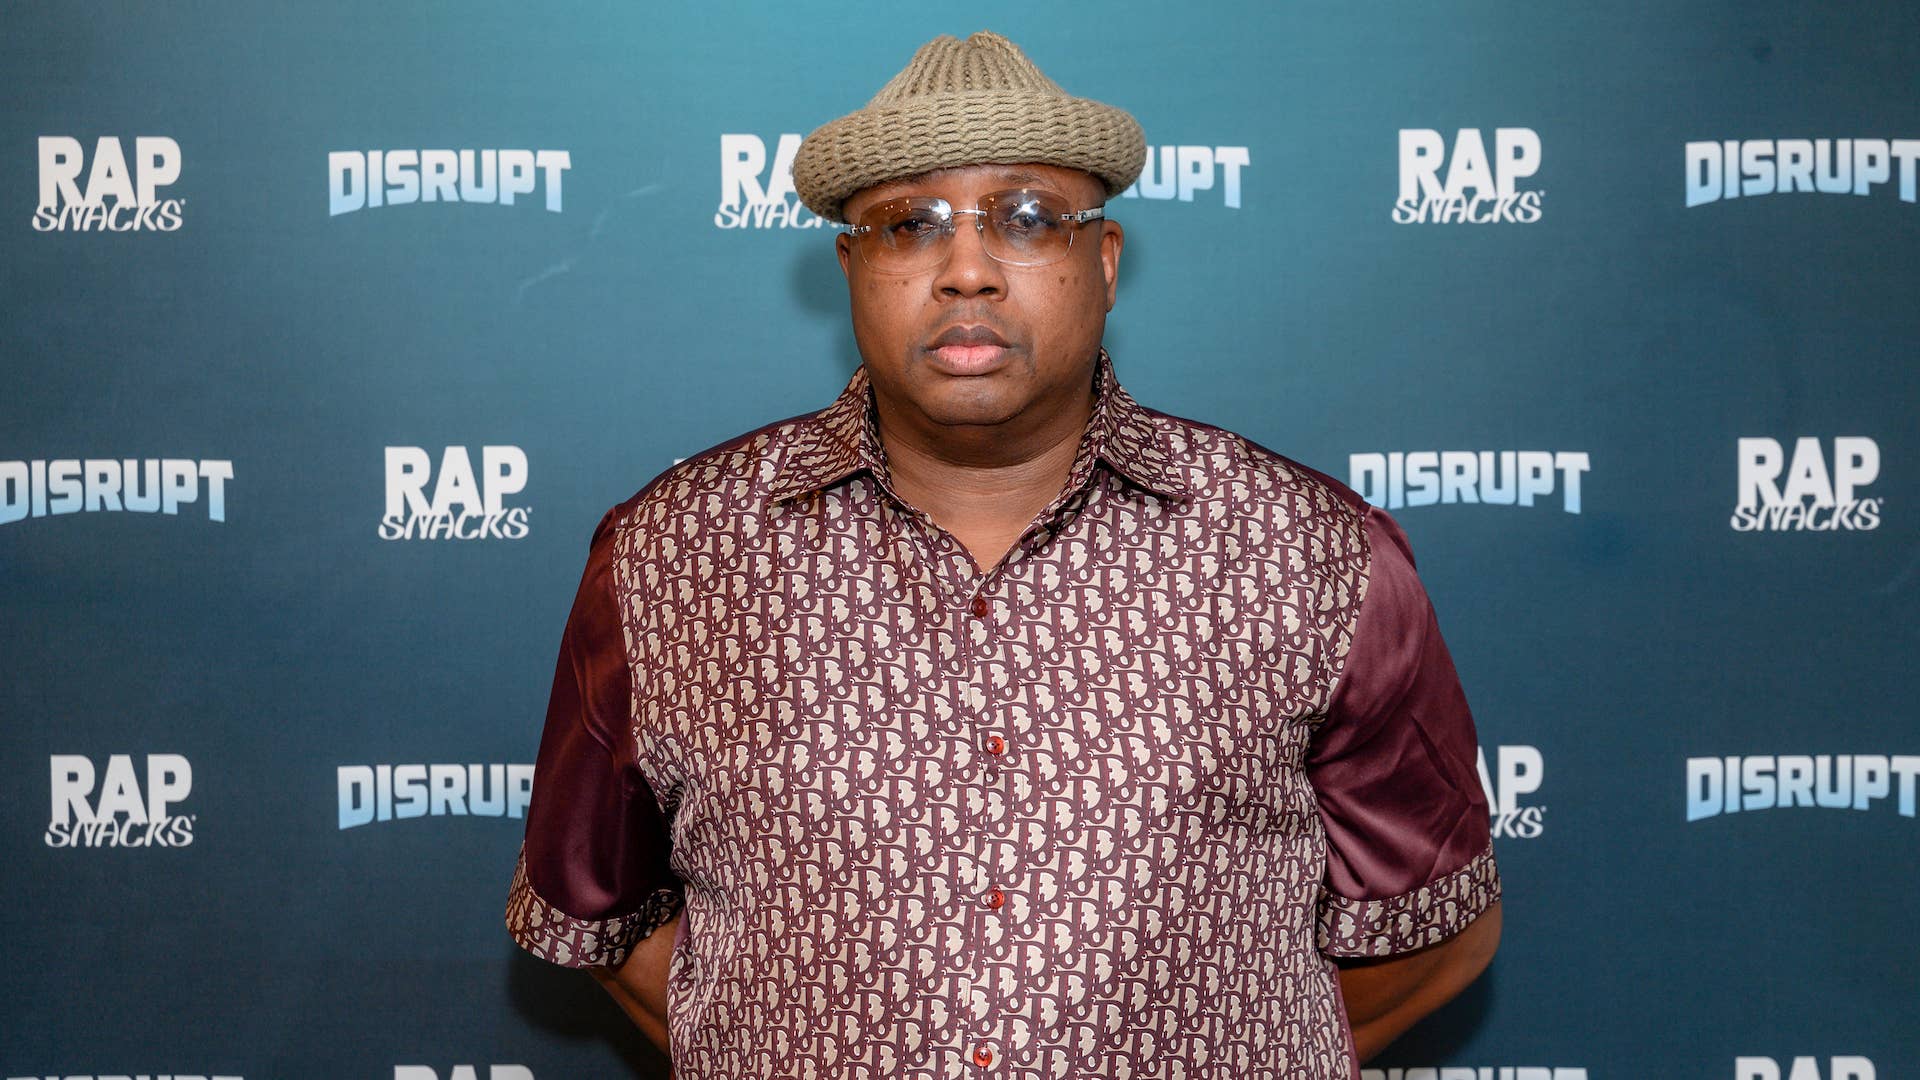 This is a picture of E-40 at disrupt and rapevent.